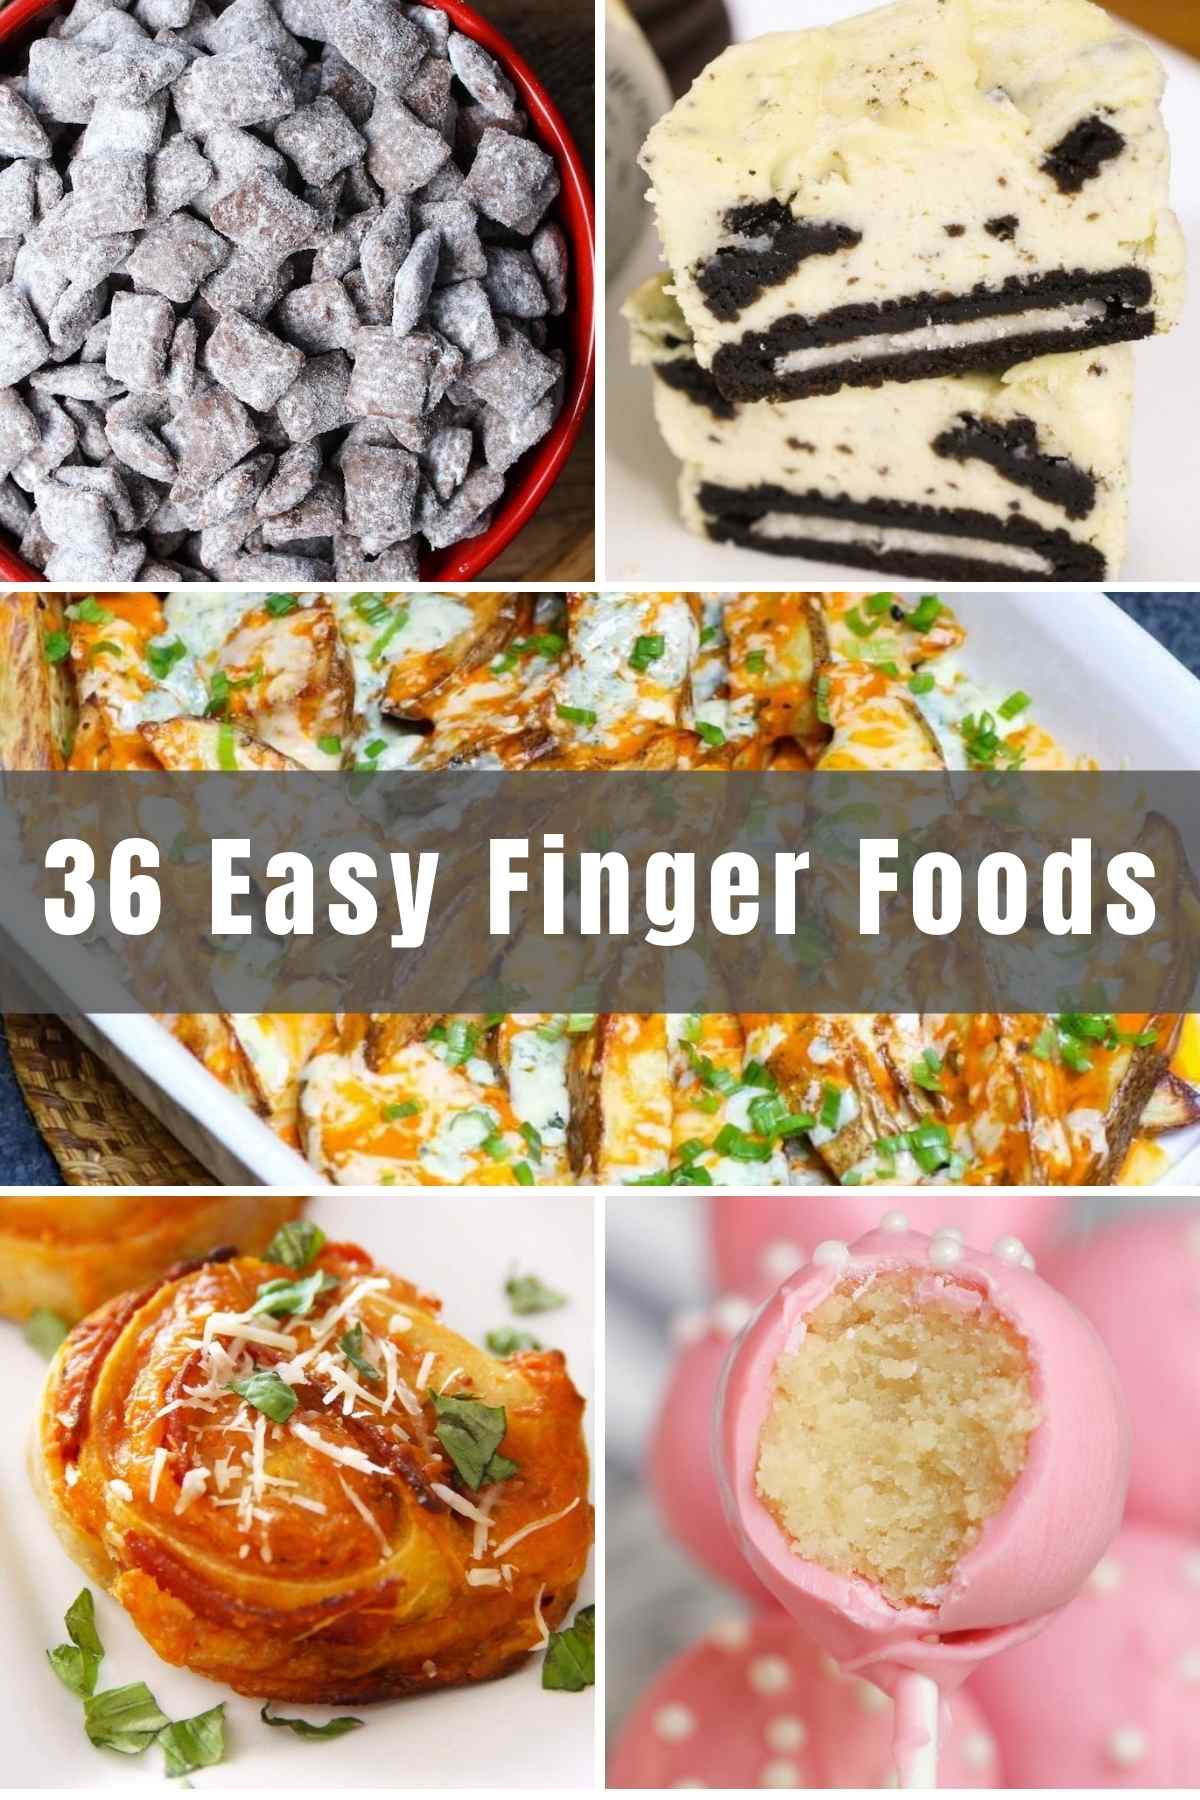 Planning parties can be hard, but cooking for them doesn’t have to be! We’ve collected 37 delicious and easy Finger Food Recipes that will be perfect for your next event. After reading this article, you’ll definitely be ready to party!